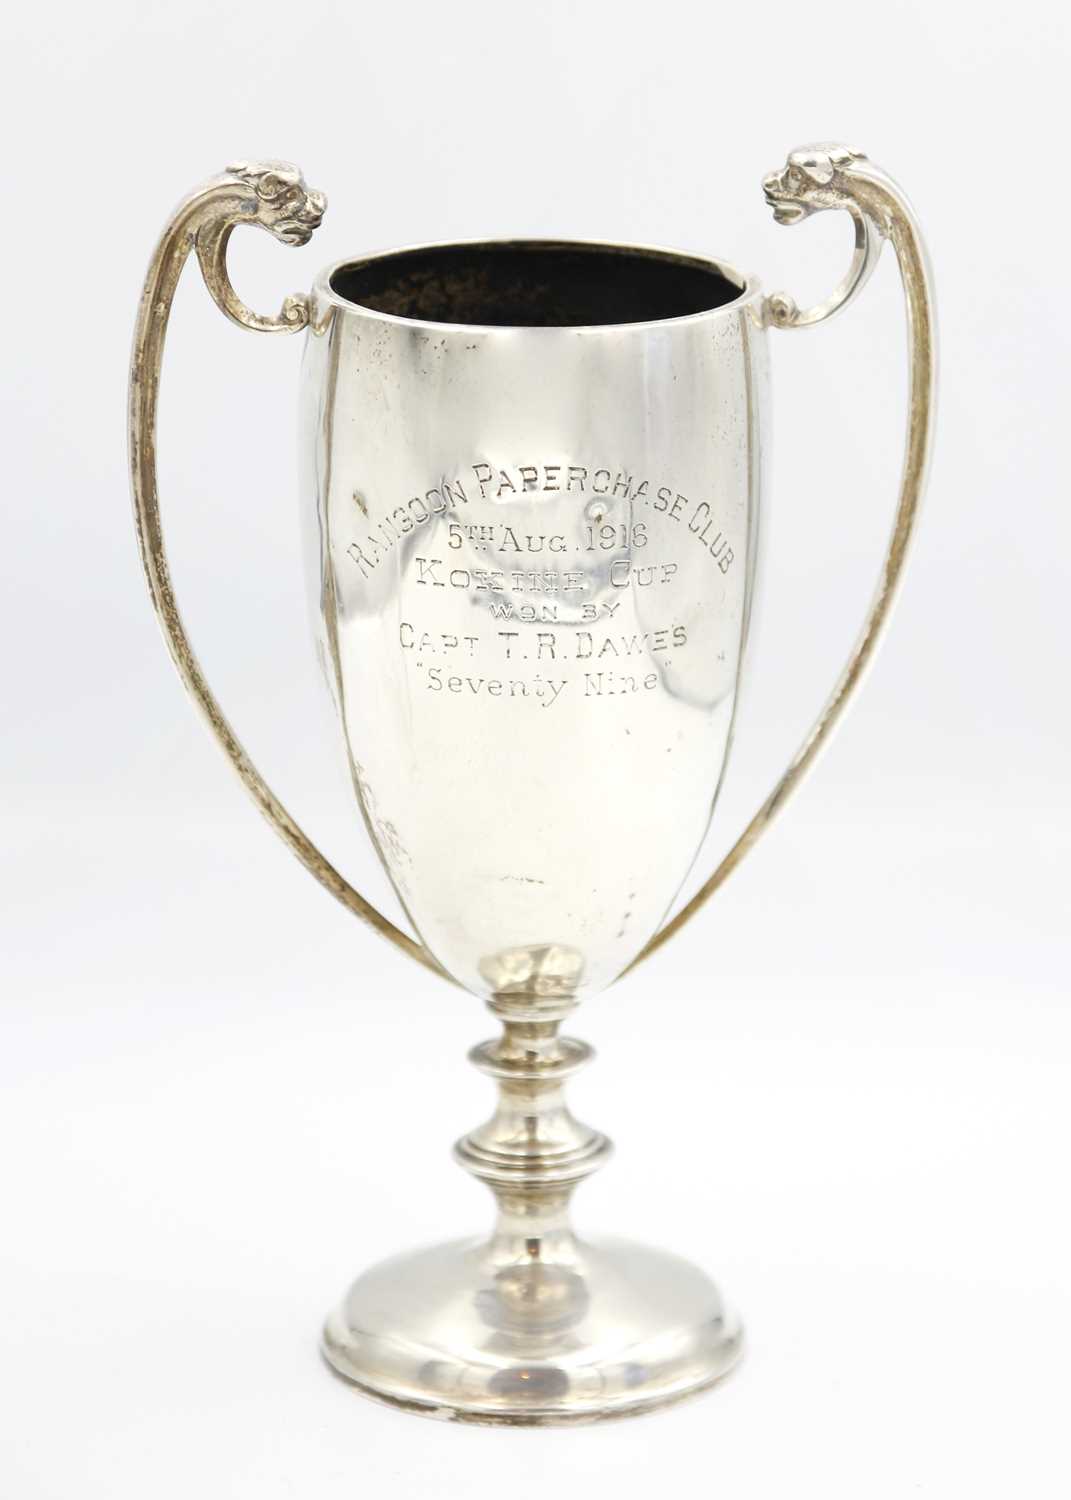 A silver trophy cup inscribed 'Rangoon Paperchase Club, 1916'. - Image 2 of 6